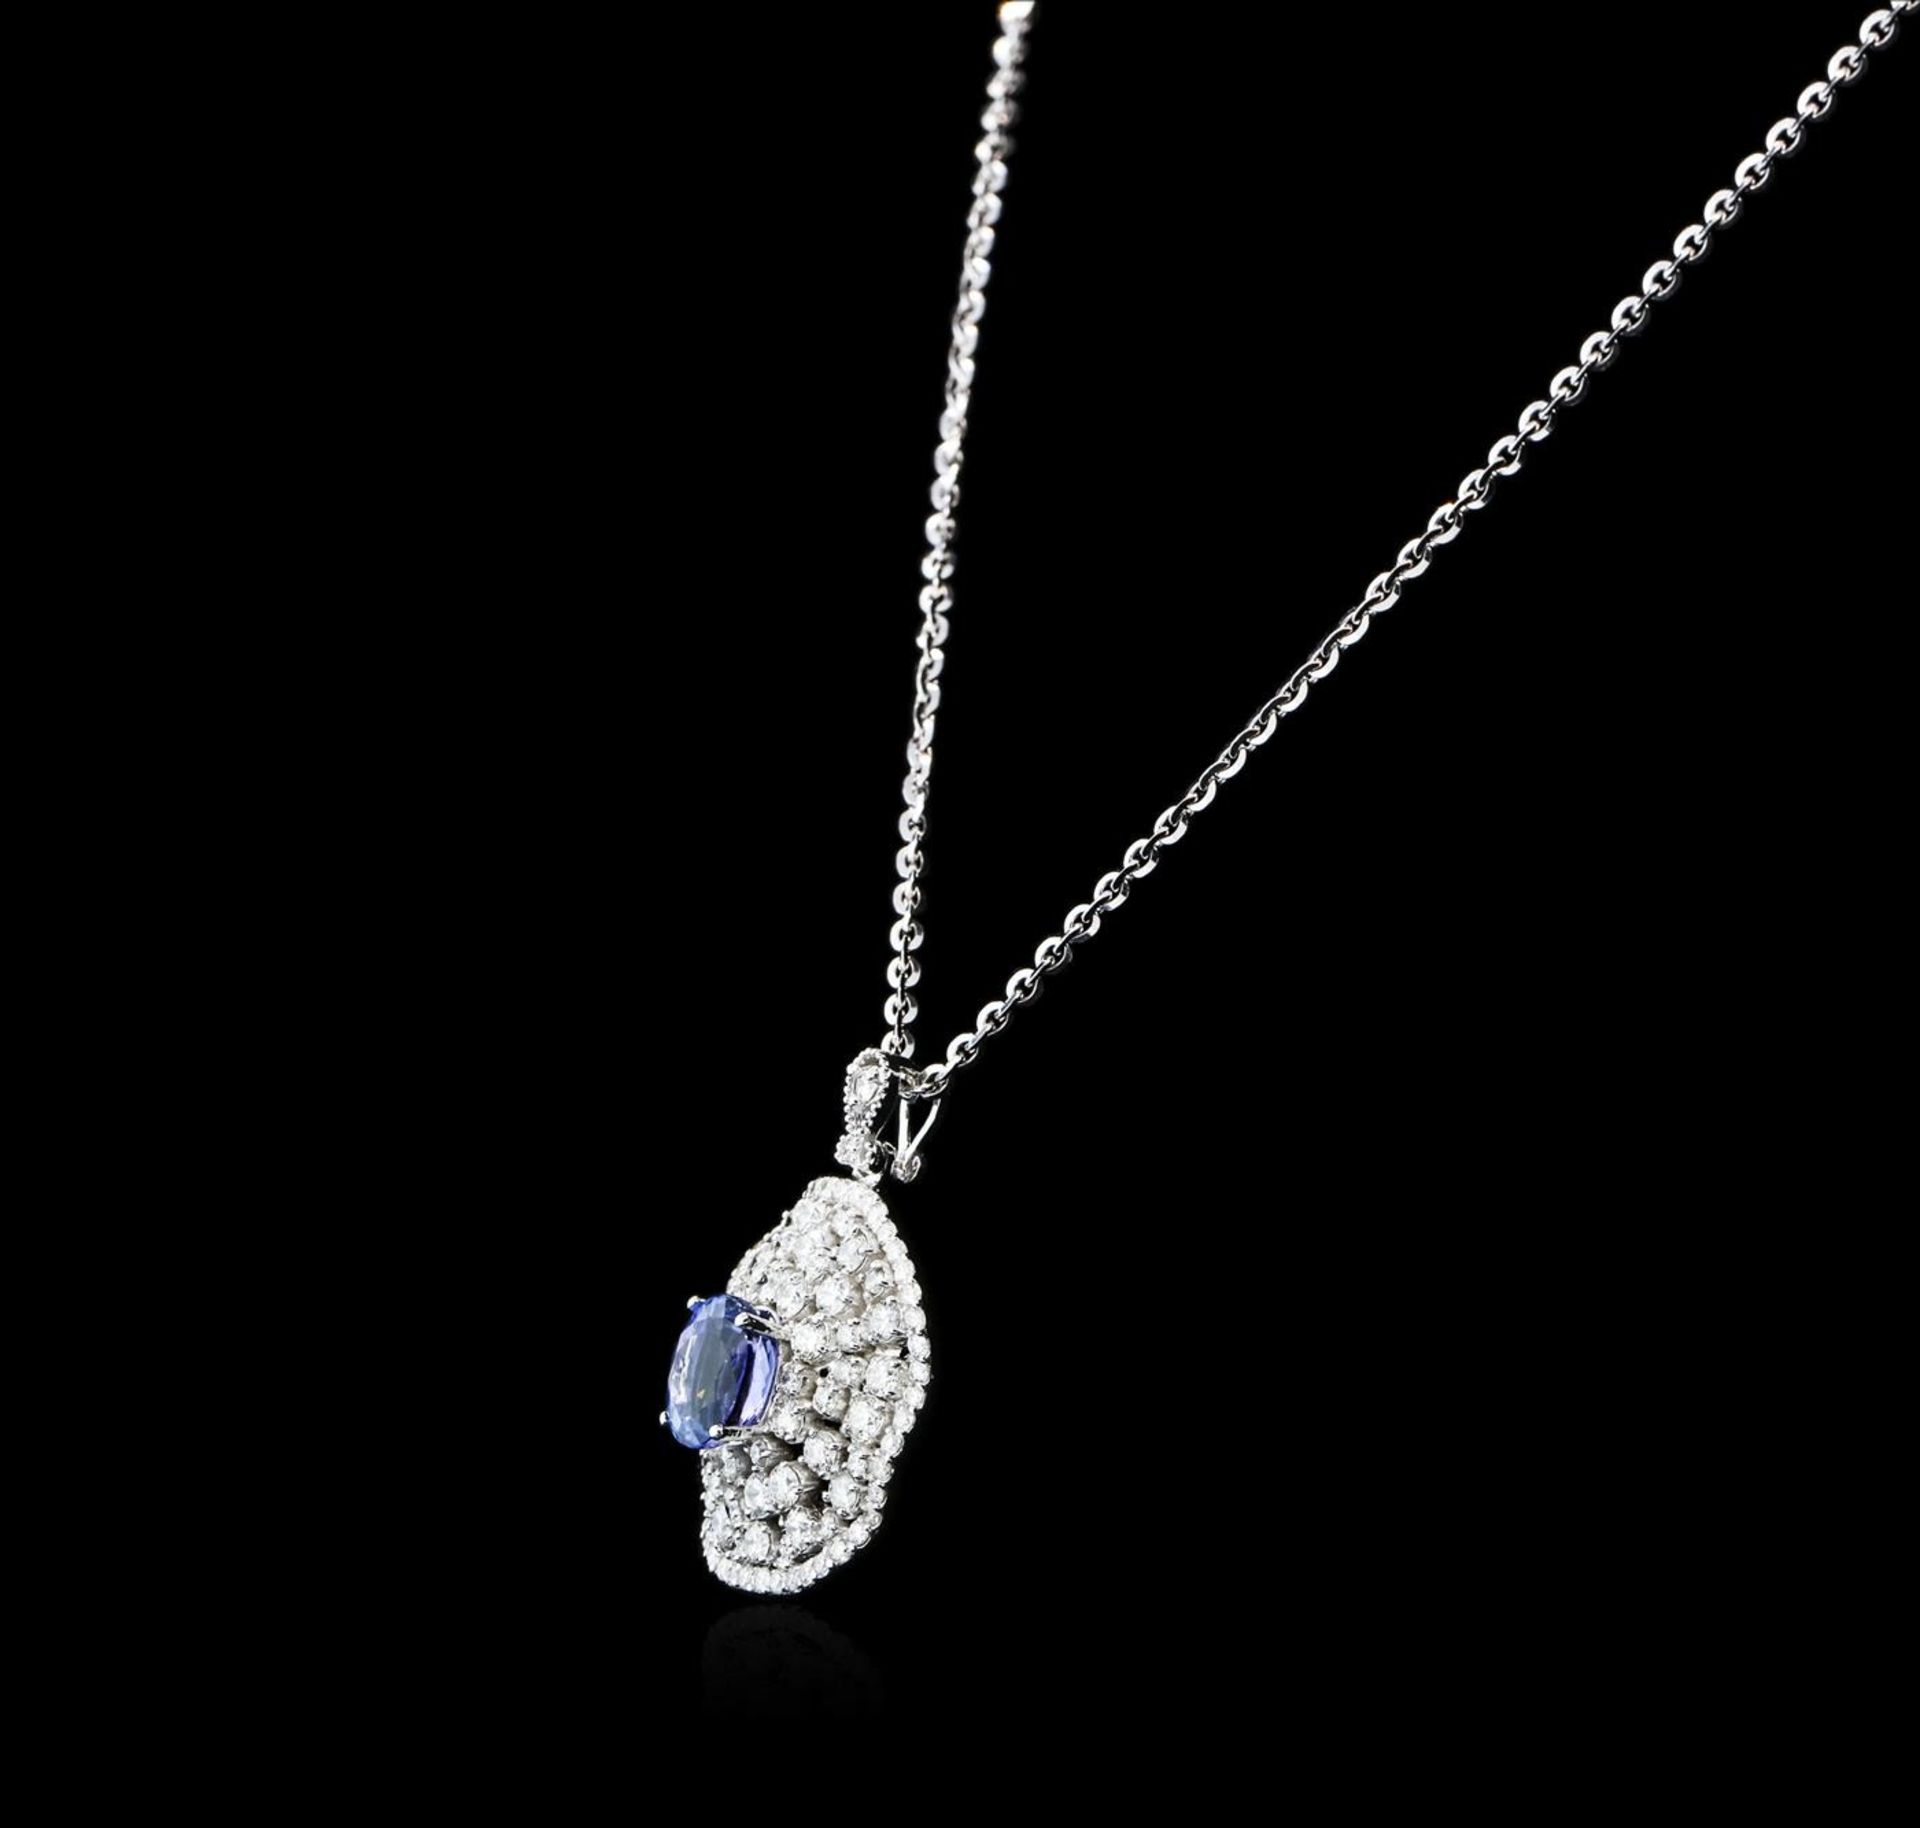 14KT White Gold 3.57ct Tanzanite and Diamond Pendant With Chain - Image 3 of 4